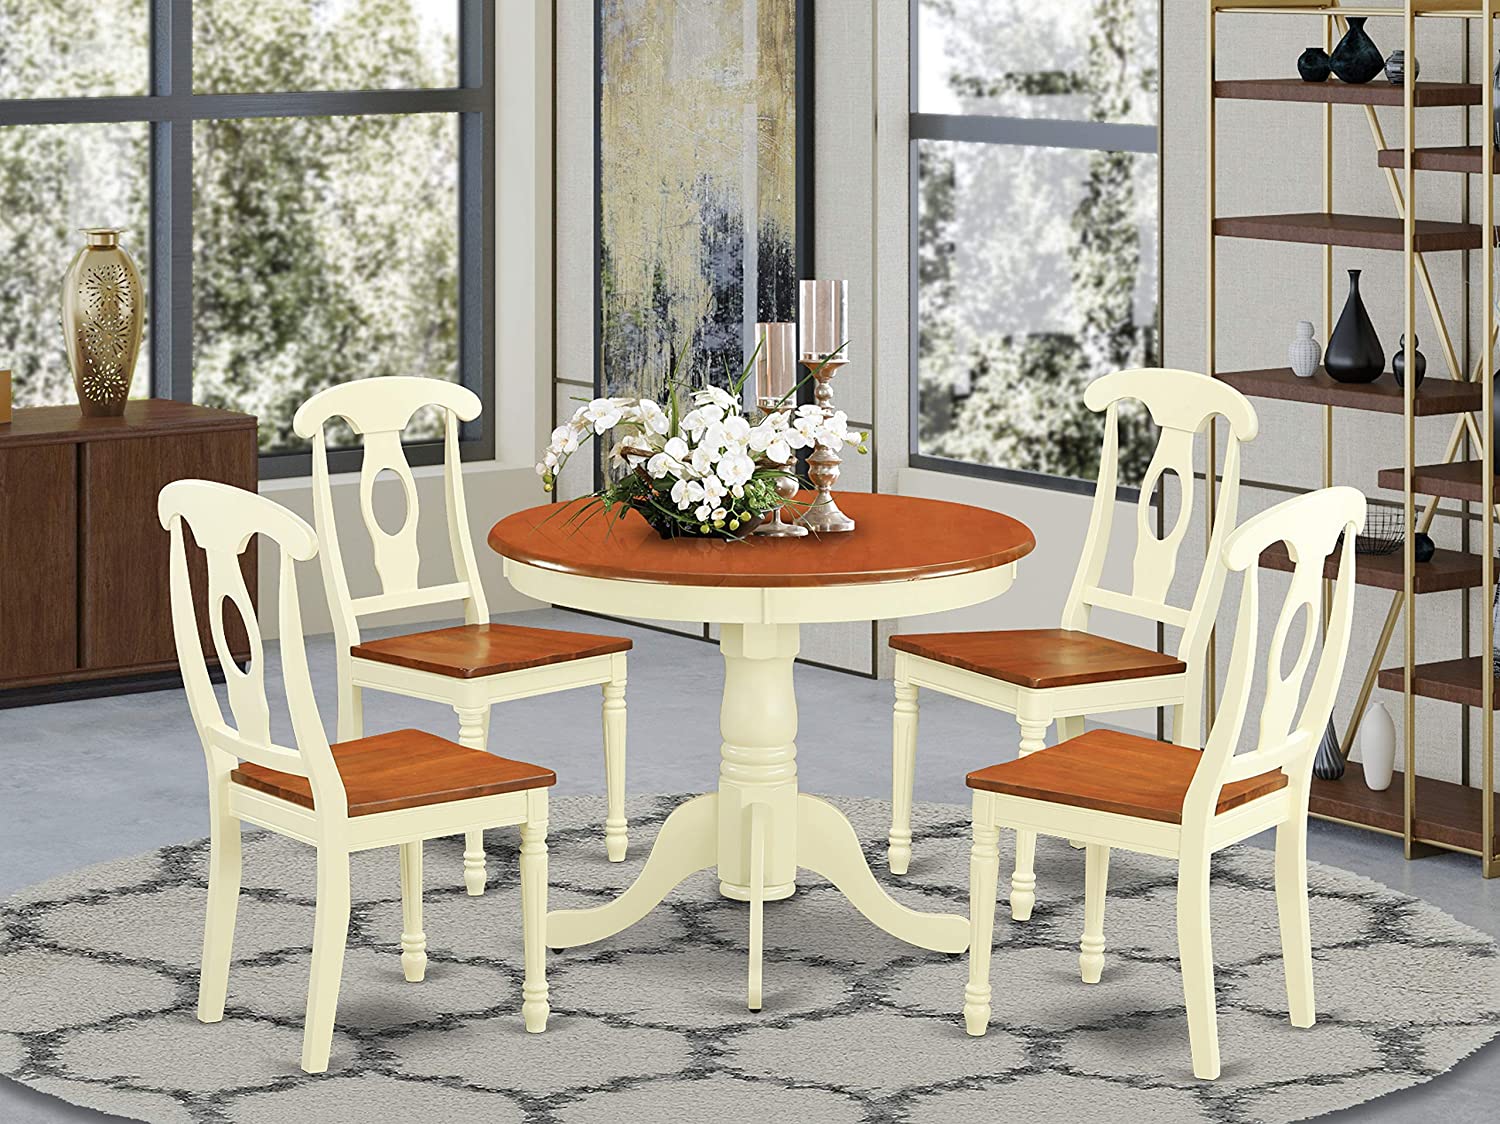 East West Furniture Dining Table Set- 4 Wonderful Wood Chairs - A Lovely Dining Room Table- Wooden Seat- Cherry and Buttermilk Dining Table